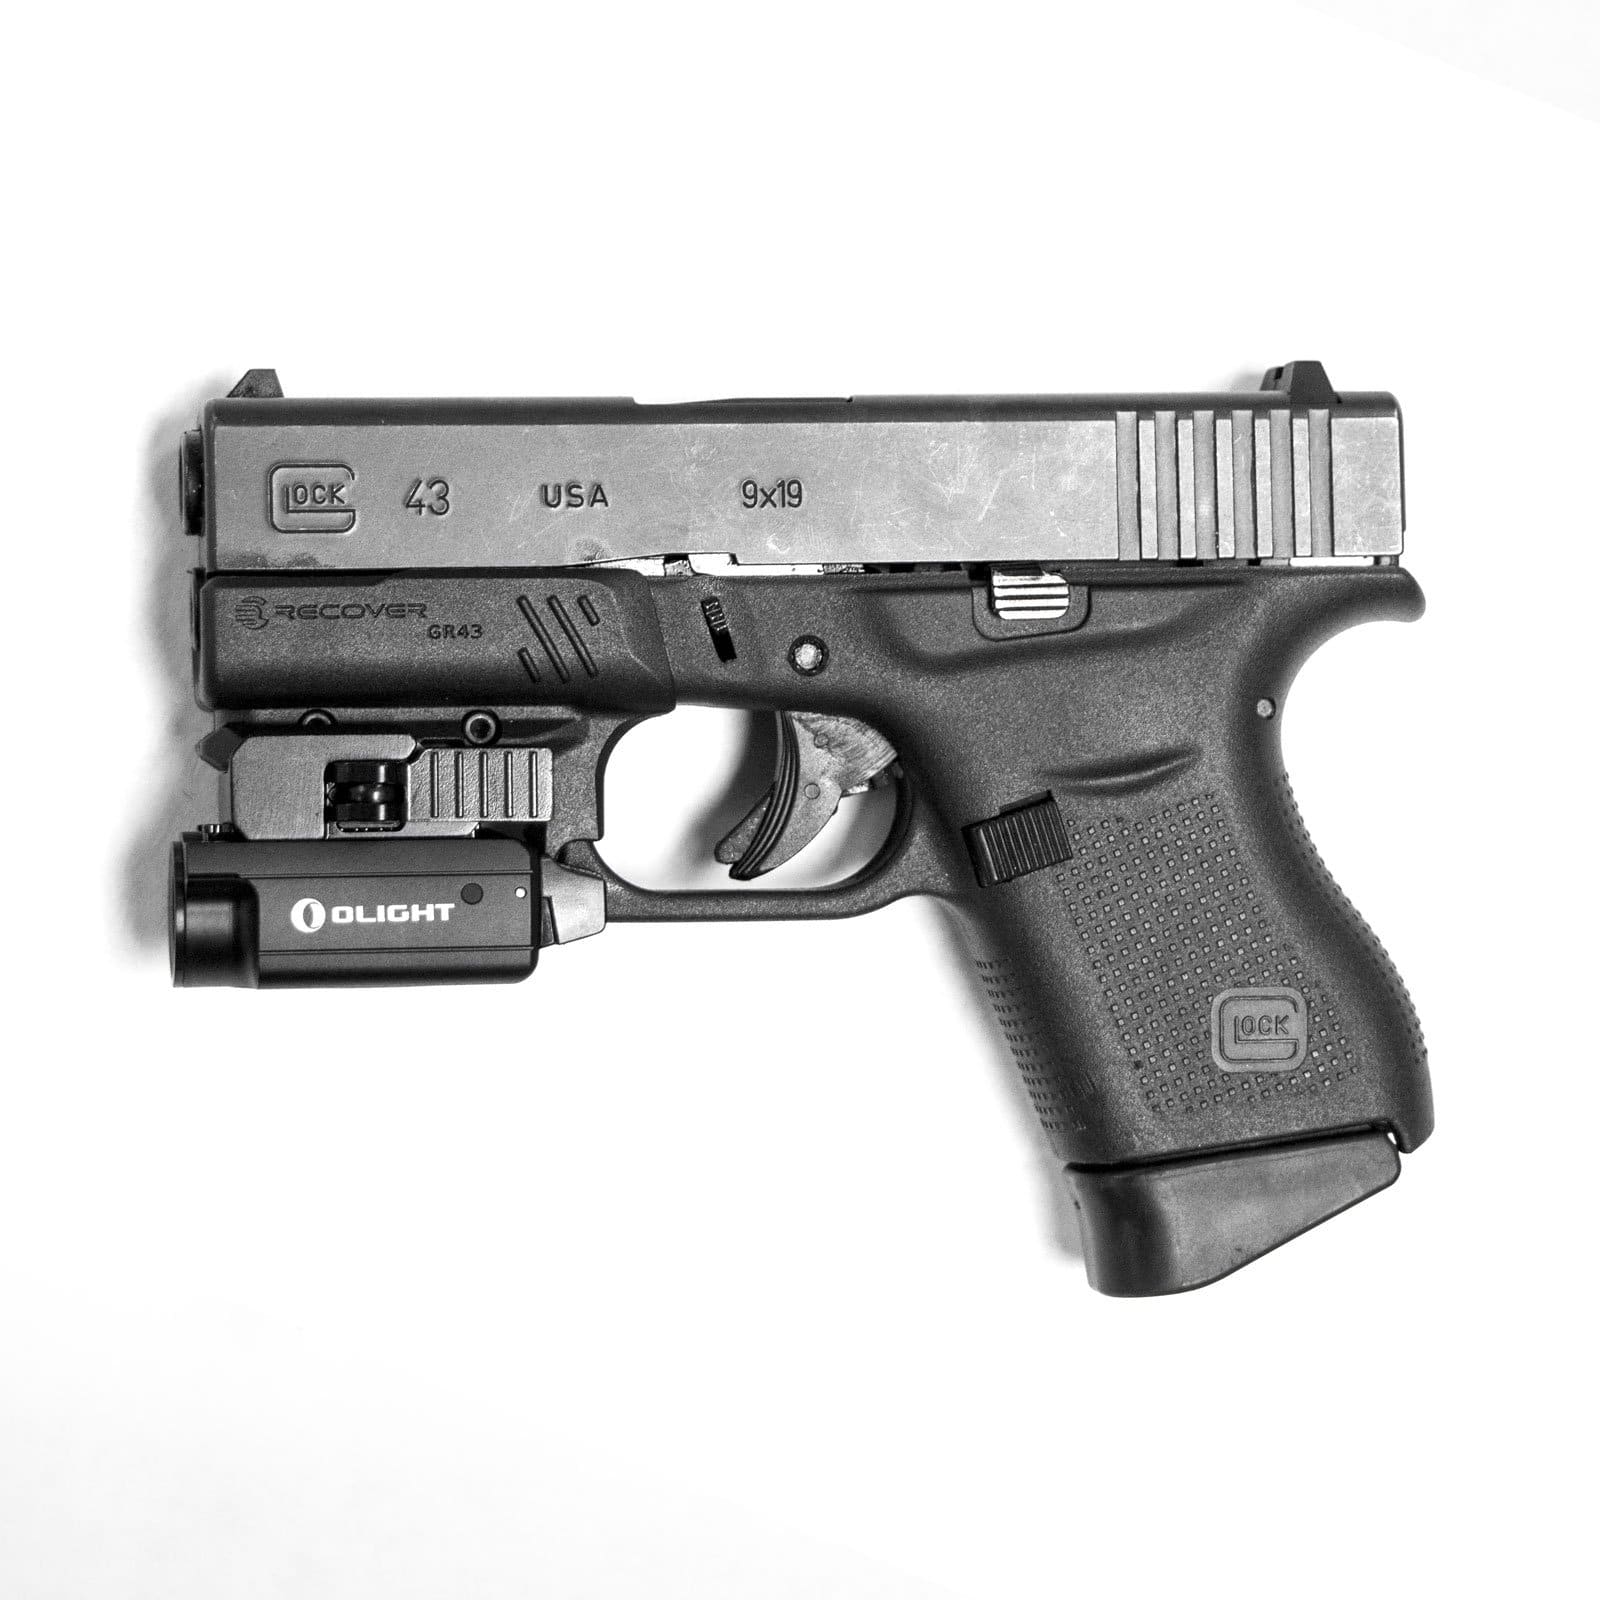 Recover Tactical Glock 43 Picatinny Rail Adapter GR43 